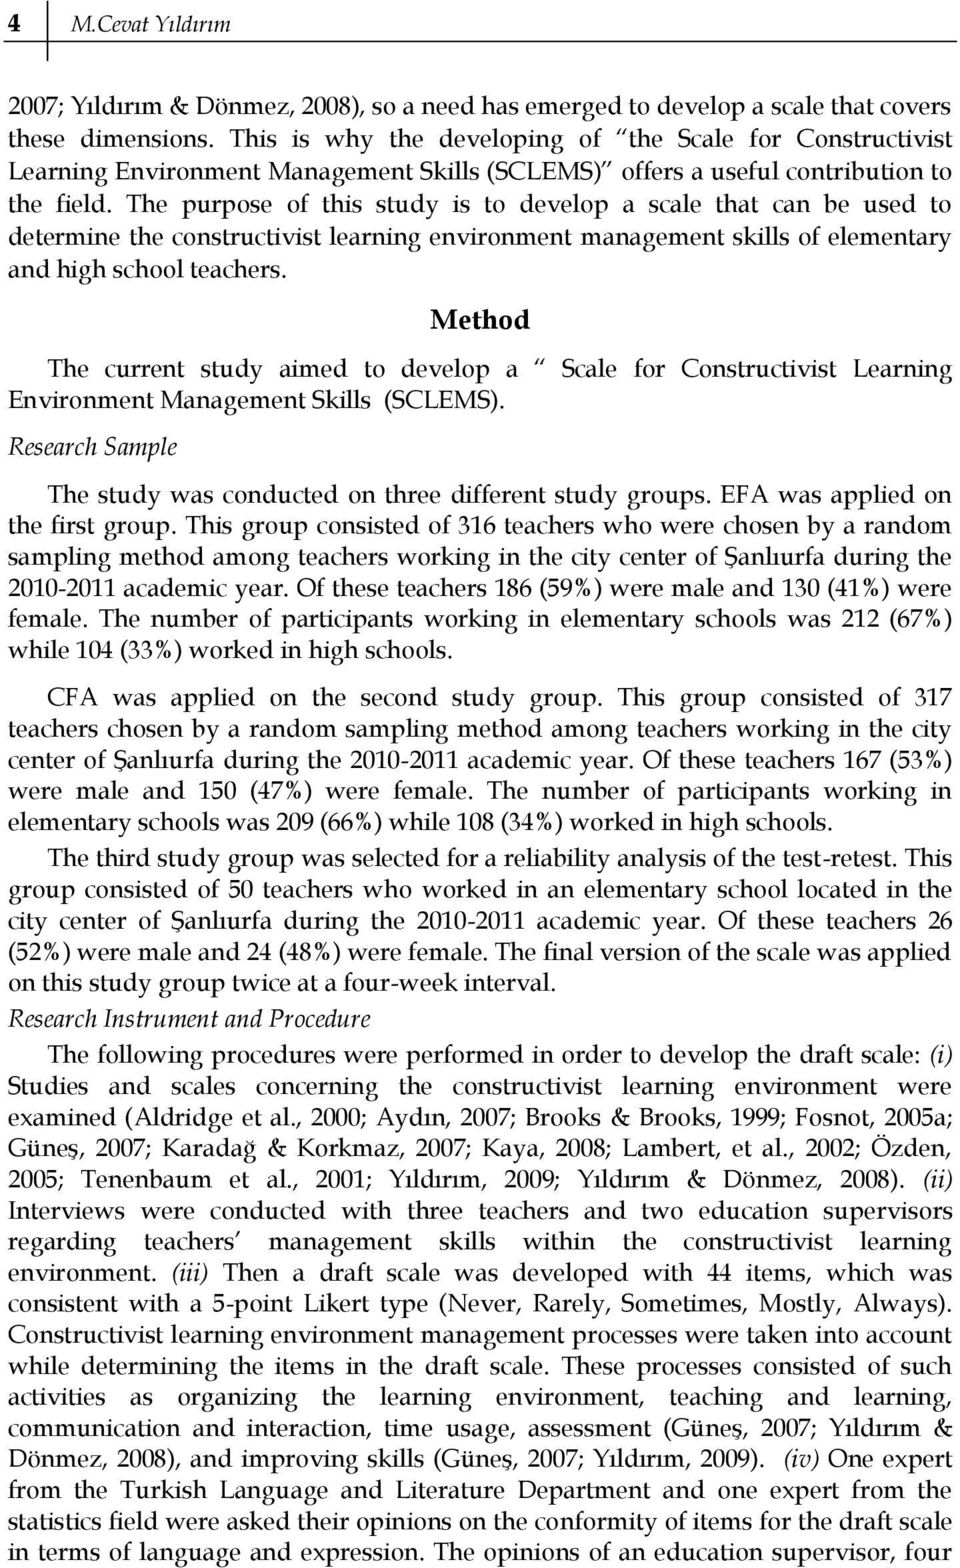 The purpose of this study is to develop a scale that can be used to determine the constructivist learning environment management skills of elementary and high school teachers.